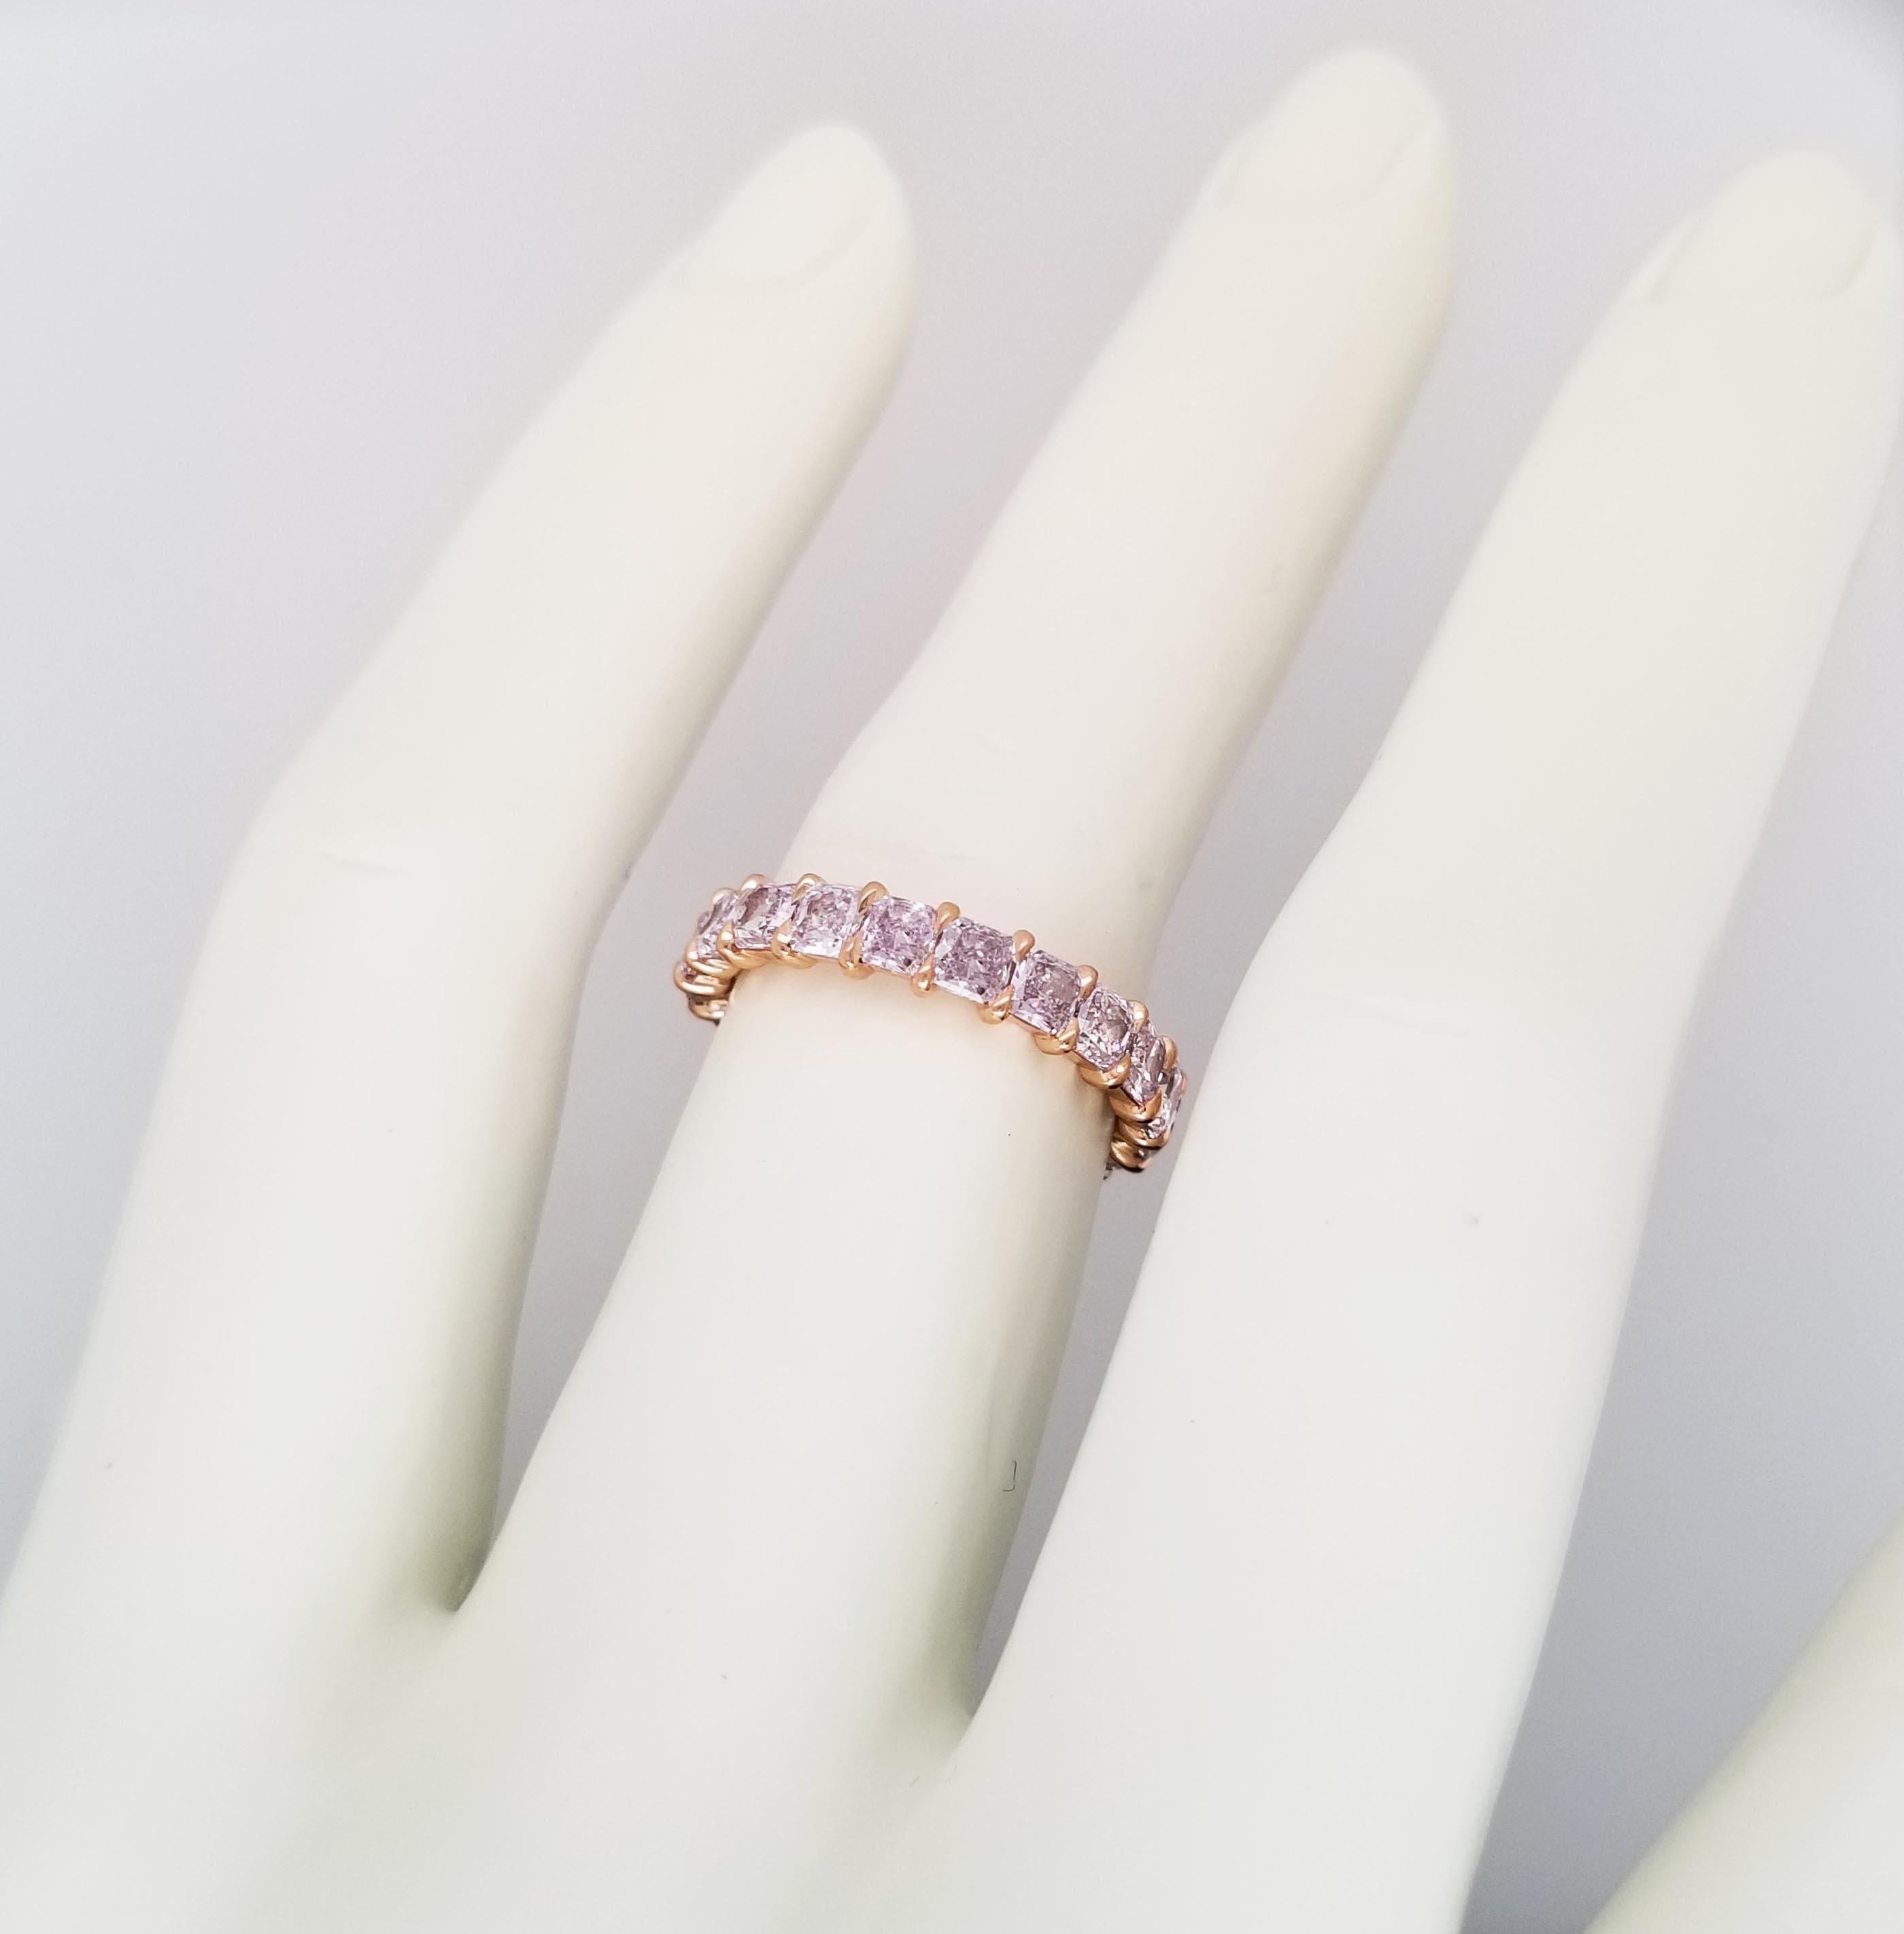 This fancy light pink radiant cut Eternity band is a pleasure to wear every day and contains 3.19 carats of natural fancy light pink diamonds set in 18 karats yellow gold handmade band. Each diamond total of 20 has a GIA color grading certificates,